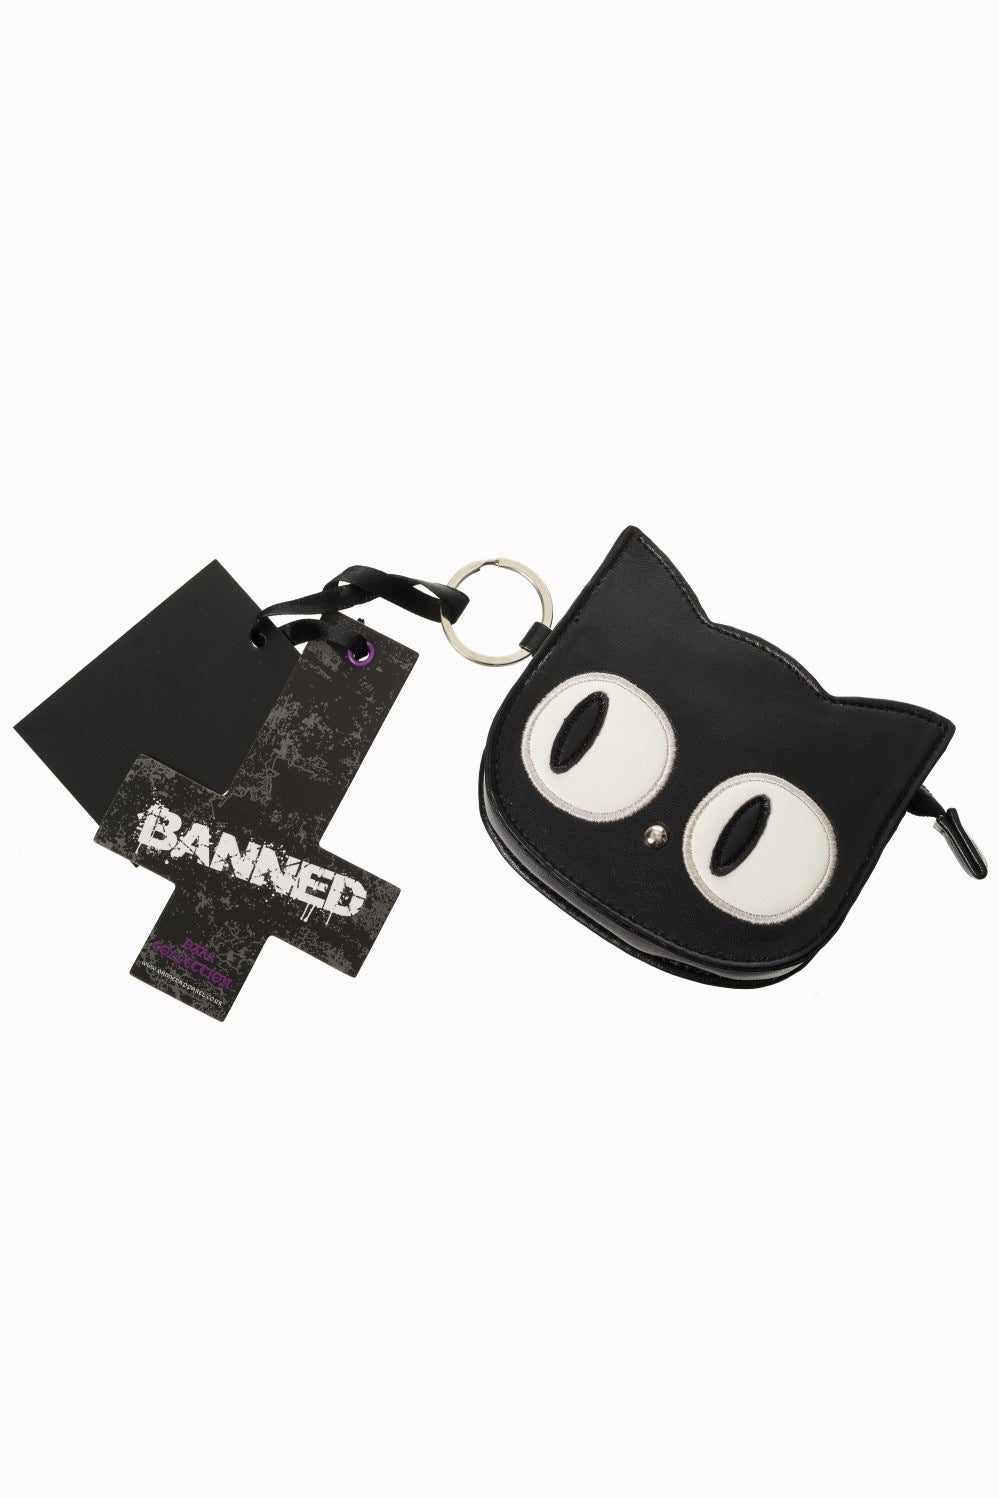 Cat head shaped coin purse with banned alternative label 